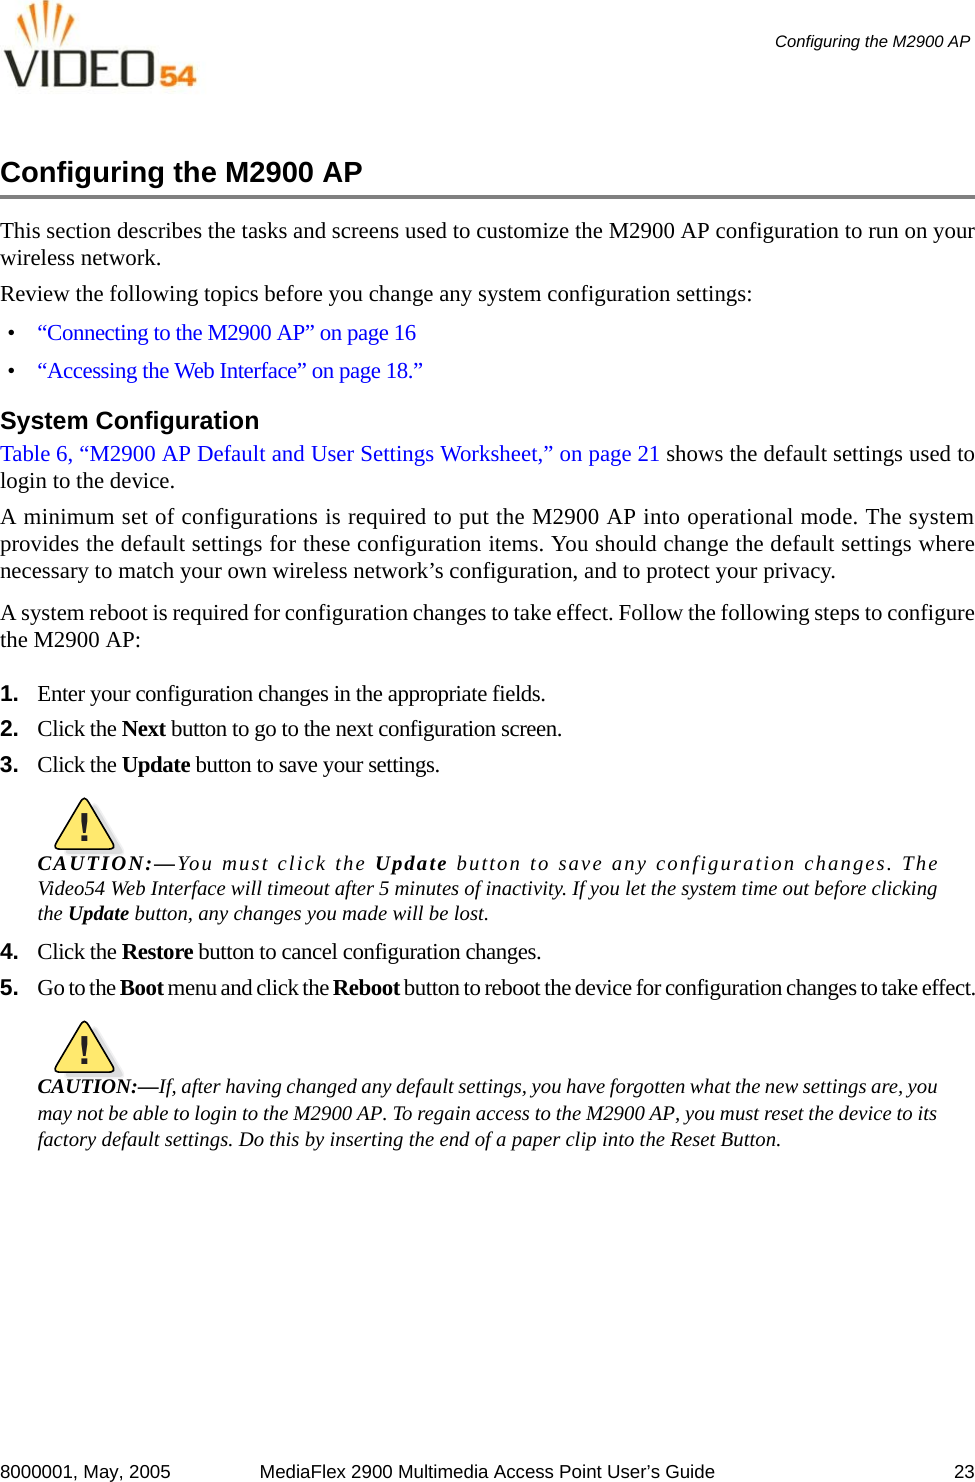 8000001, May, 2005 MediaFlex 2900 Multimedia Access Point User’s Guide 23Configuring the M2900 AP Configuring the M2900 AP This section describes the tasks and screens used to customize the M2900 AP configuration to run on yourwireless network.Review the following topics before you change any system configuration settings:•“Connecting to the M2900 AP” on page 16•“Accessing the Web Interface” on page 18.”System ConfigurationTable 6, “M2900 AP Default and User Settings Worksheet,” on page 21 shows the default settings used tologin to the device.A minimum set of configurations is required to put the M2900 AP into operational mode. The systemprovides the default settings for these configuration items. You should change the default settings wherenecessary to match your own wireless network’s configuration, and to protect your privacy.A system reboot is required for configuration changes to take effect. Follow the following steps to configurethe M2900 AP: 1. Enter your configuration changes in the appropriate fields.2. Click the Next button to go to the next configuration screen.3. Click the Update button to save your settings.!CAUTION:—You must click the Update button to save any configuration changes. TheVideo54 Web Interface will timeout after 5 minutes of inactivity. If you let the system time out before clickingthe Update button, any changes you made will be lost.4. Click the Restore button to cancel configuration changes.5. Go to the Boot menu and click the Reboot button to reboot the device for configuration changes to take effect.!CAUTION:—If, after having changed any default settings, you have forgotten what the new settings are, youmay not be able to login to the M2900 AP. To regain access to the M2900 AP, you must reset the device to itsfactory default settings. Do this by inserting the end of a paper clip into the Reset Button.